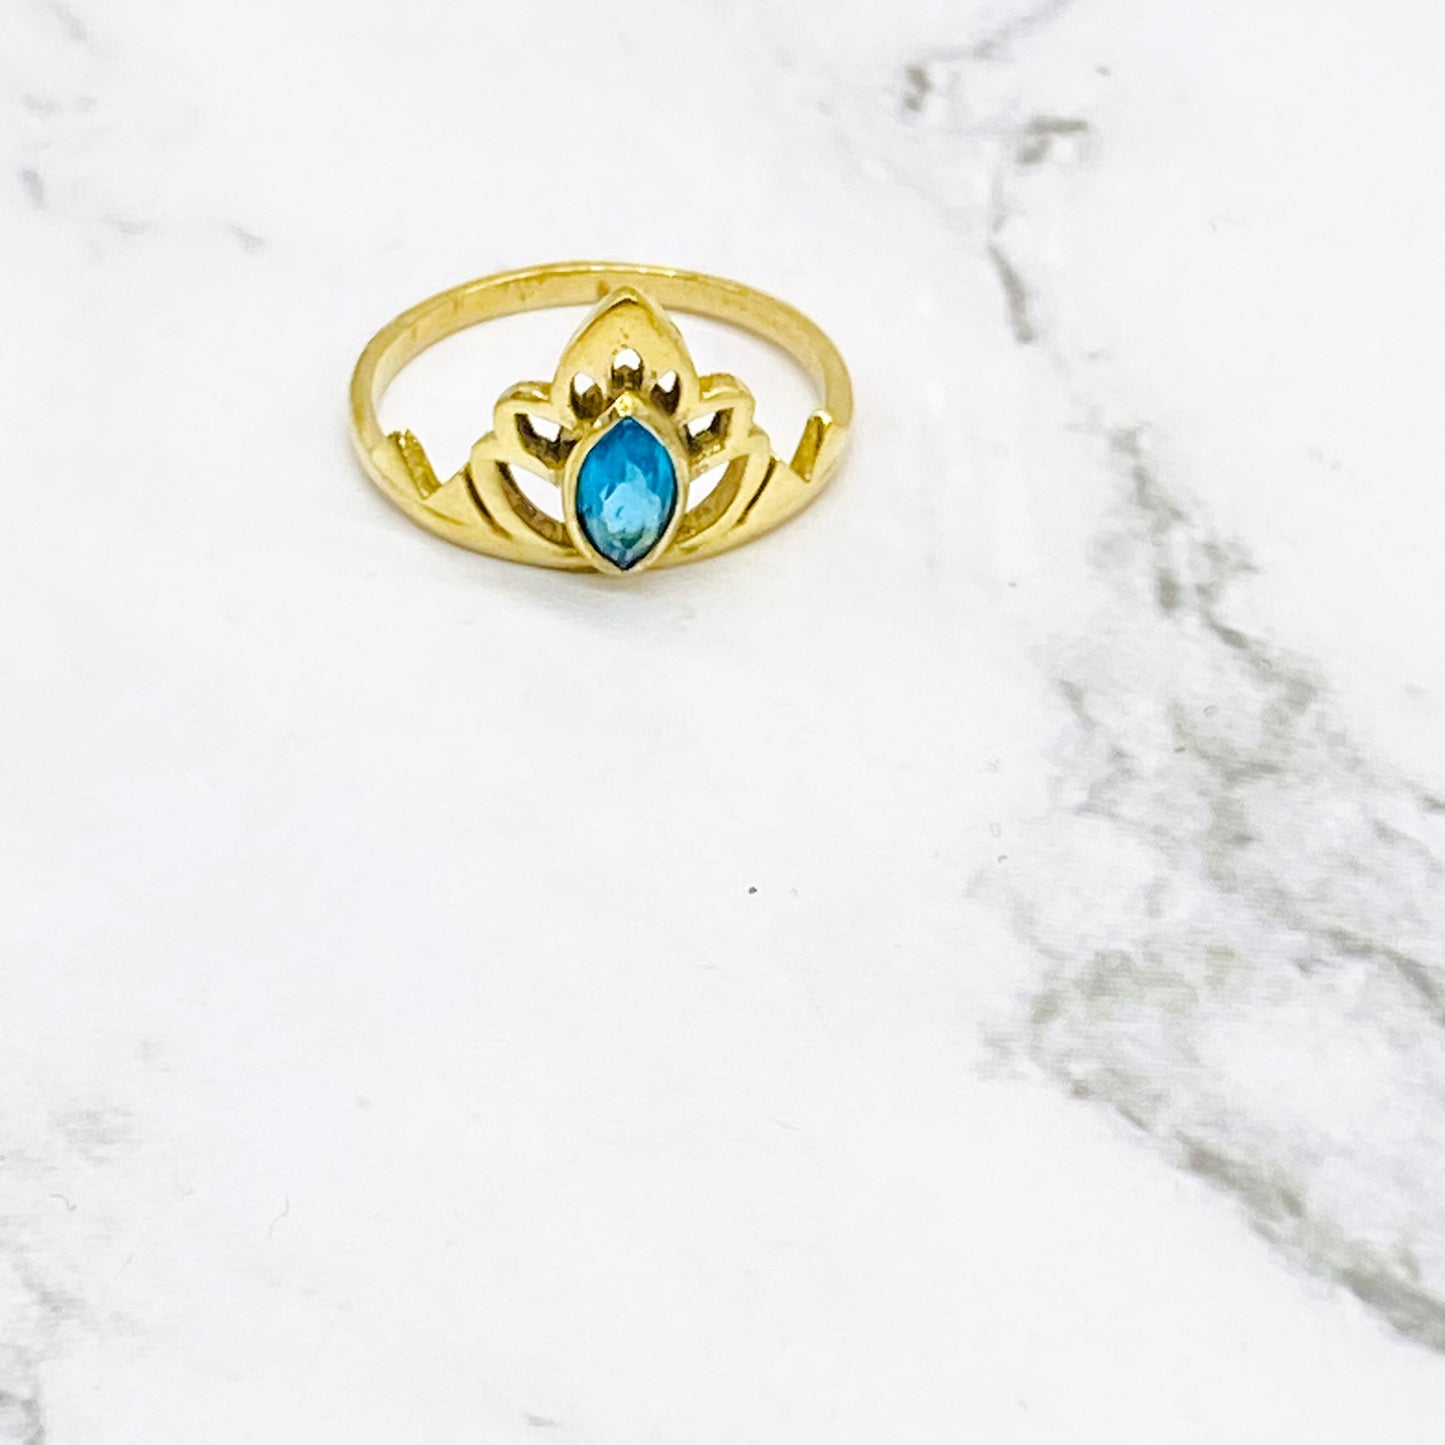 Gold Filled Crystal Ring, Handmade Jewelry, Fashionable Ring, Faceted Gemstone Ring, Gift For Her, Statement Ring, Vintage Style Ring